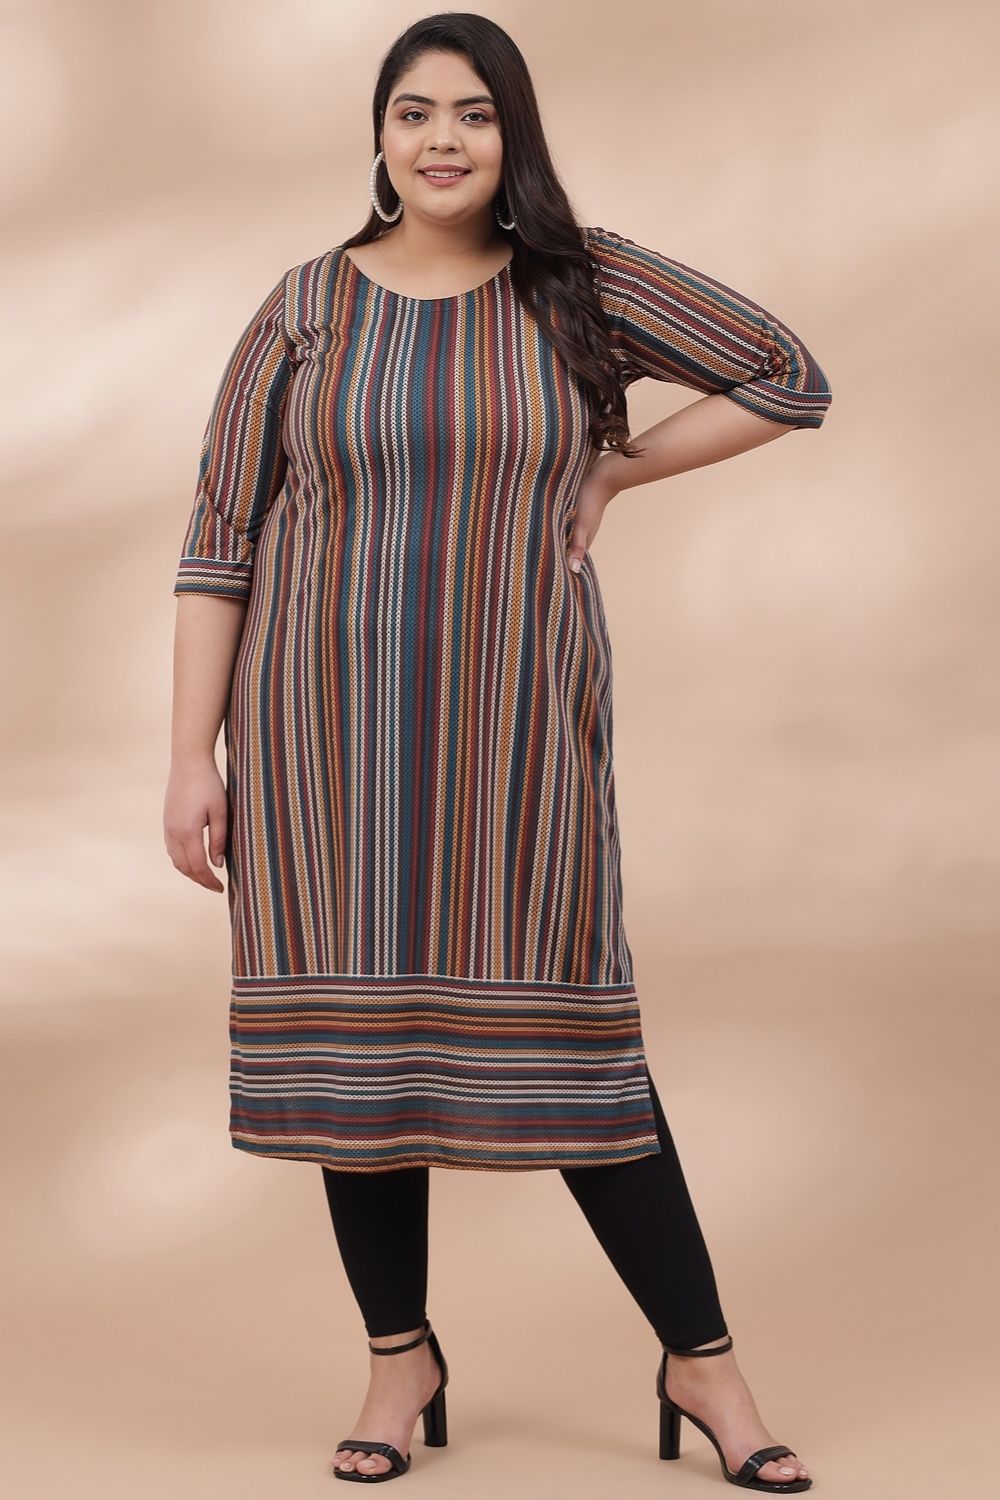 Plus Size Knit Love Printed Kurti Online in India